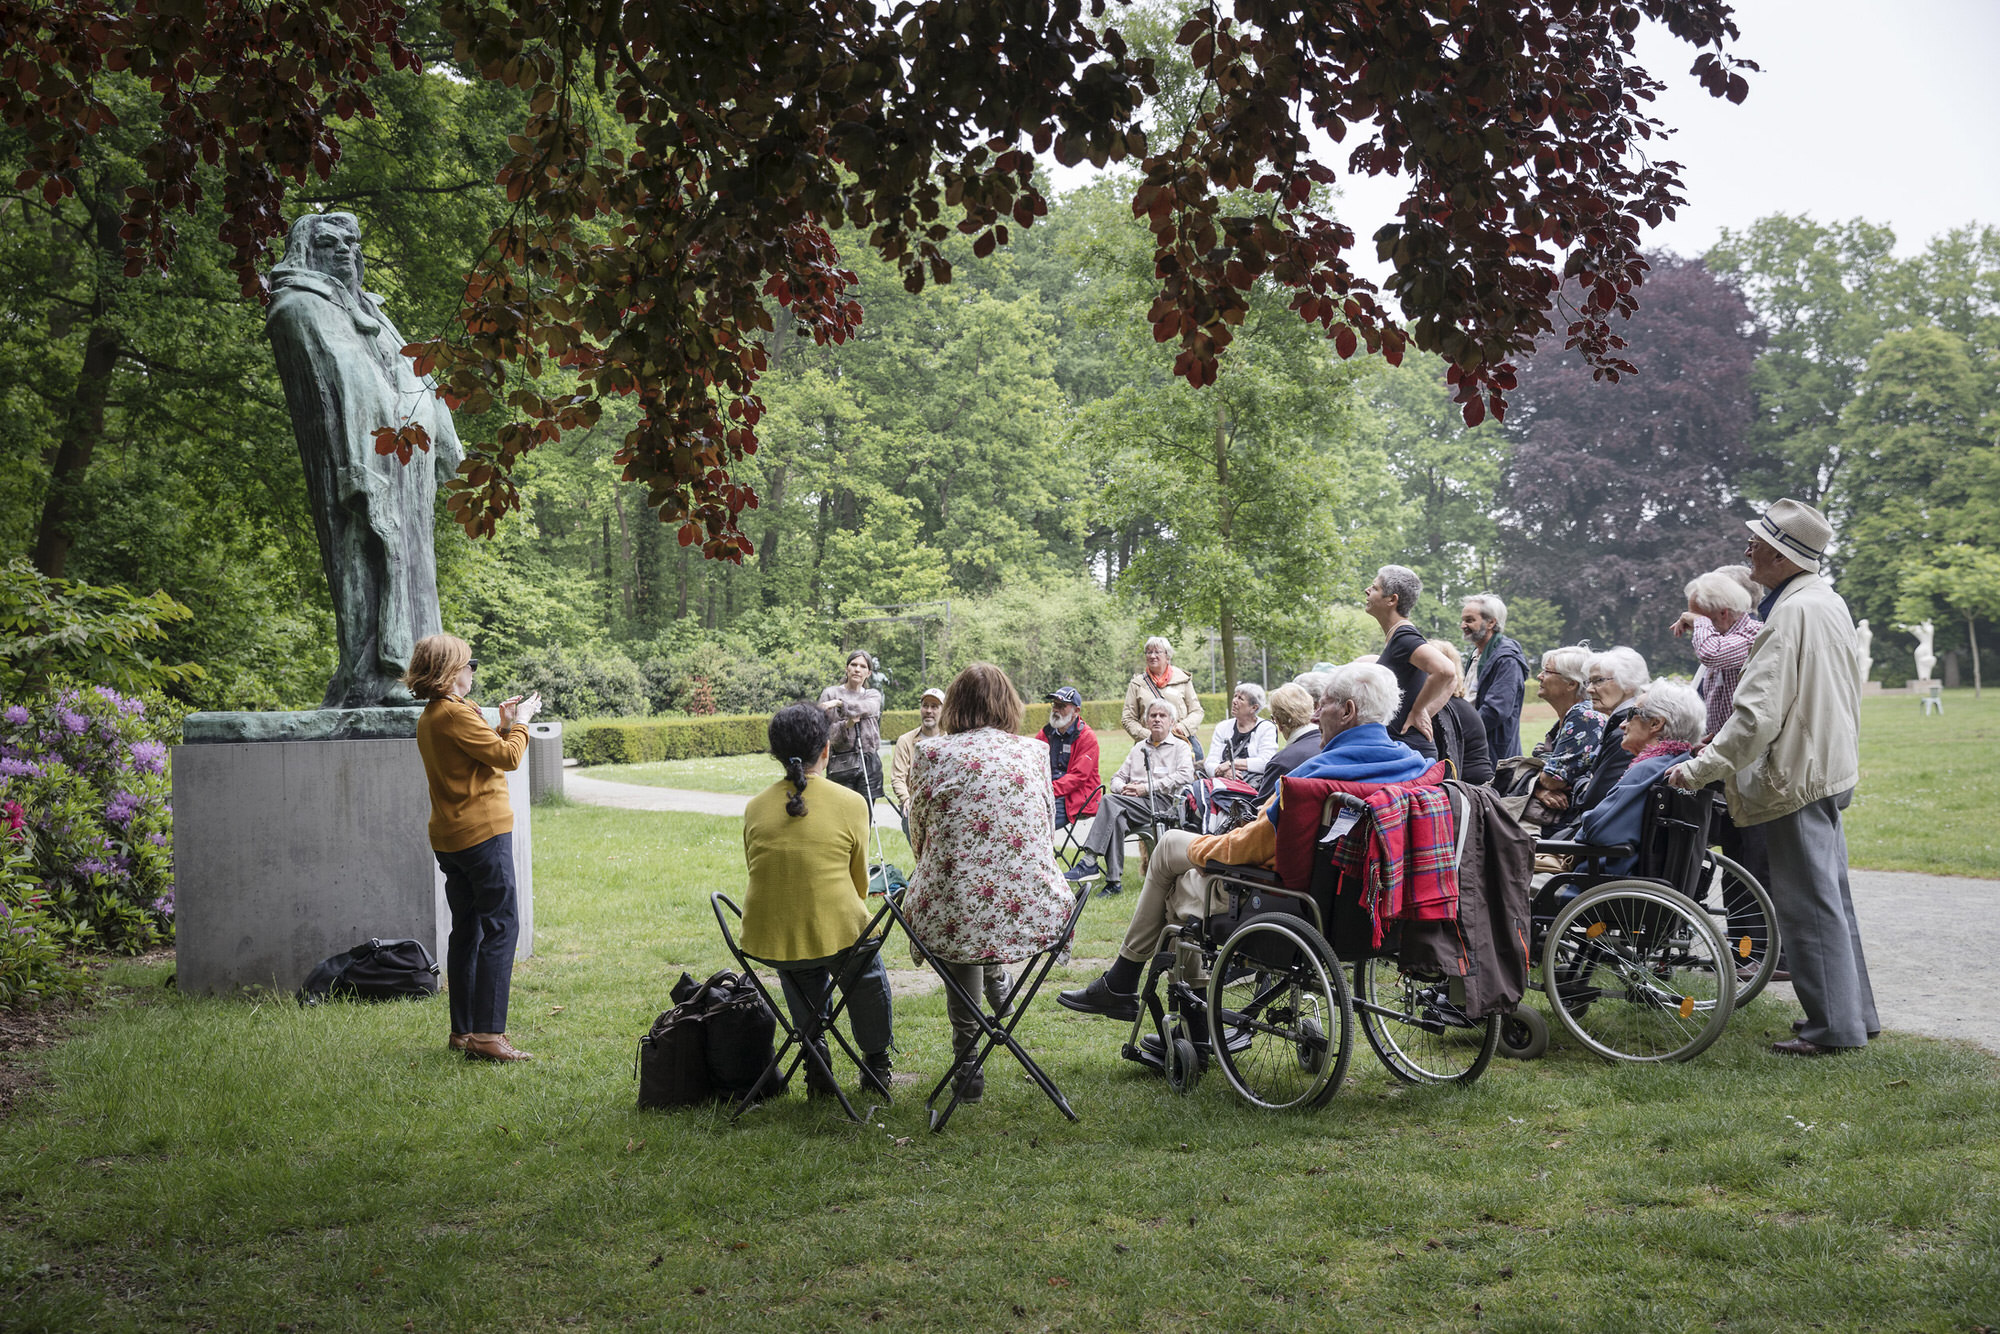 Meet me @ Middelheim Museum – people with dementia residing in residential care centres